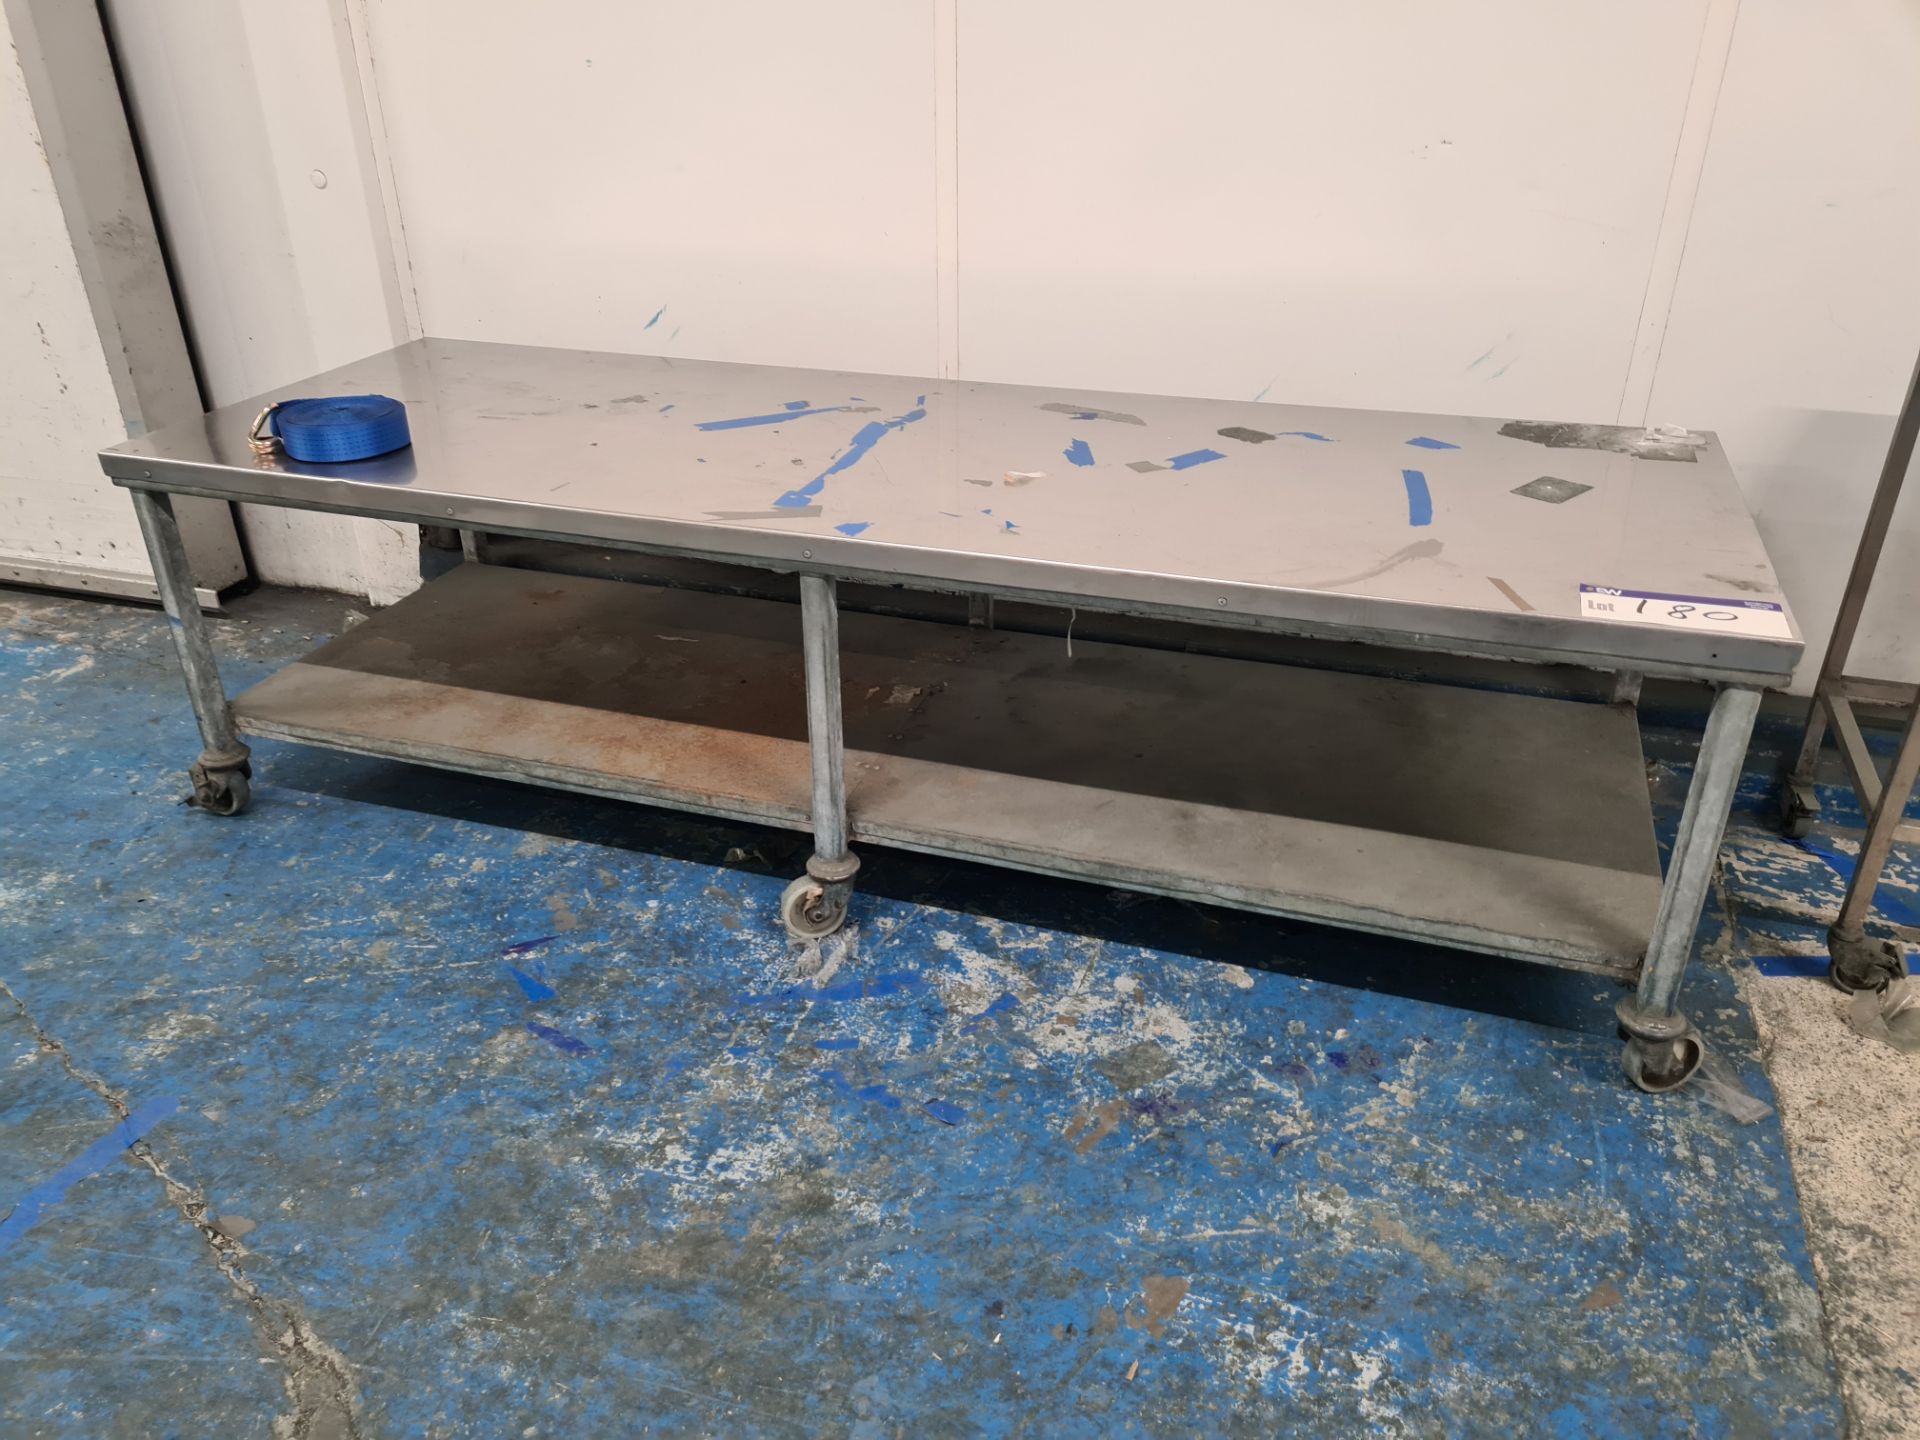 Stainless Steel Mobile Preperation Table, Approx. 2.4m x 0.8m x 0.7m